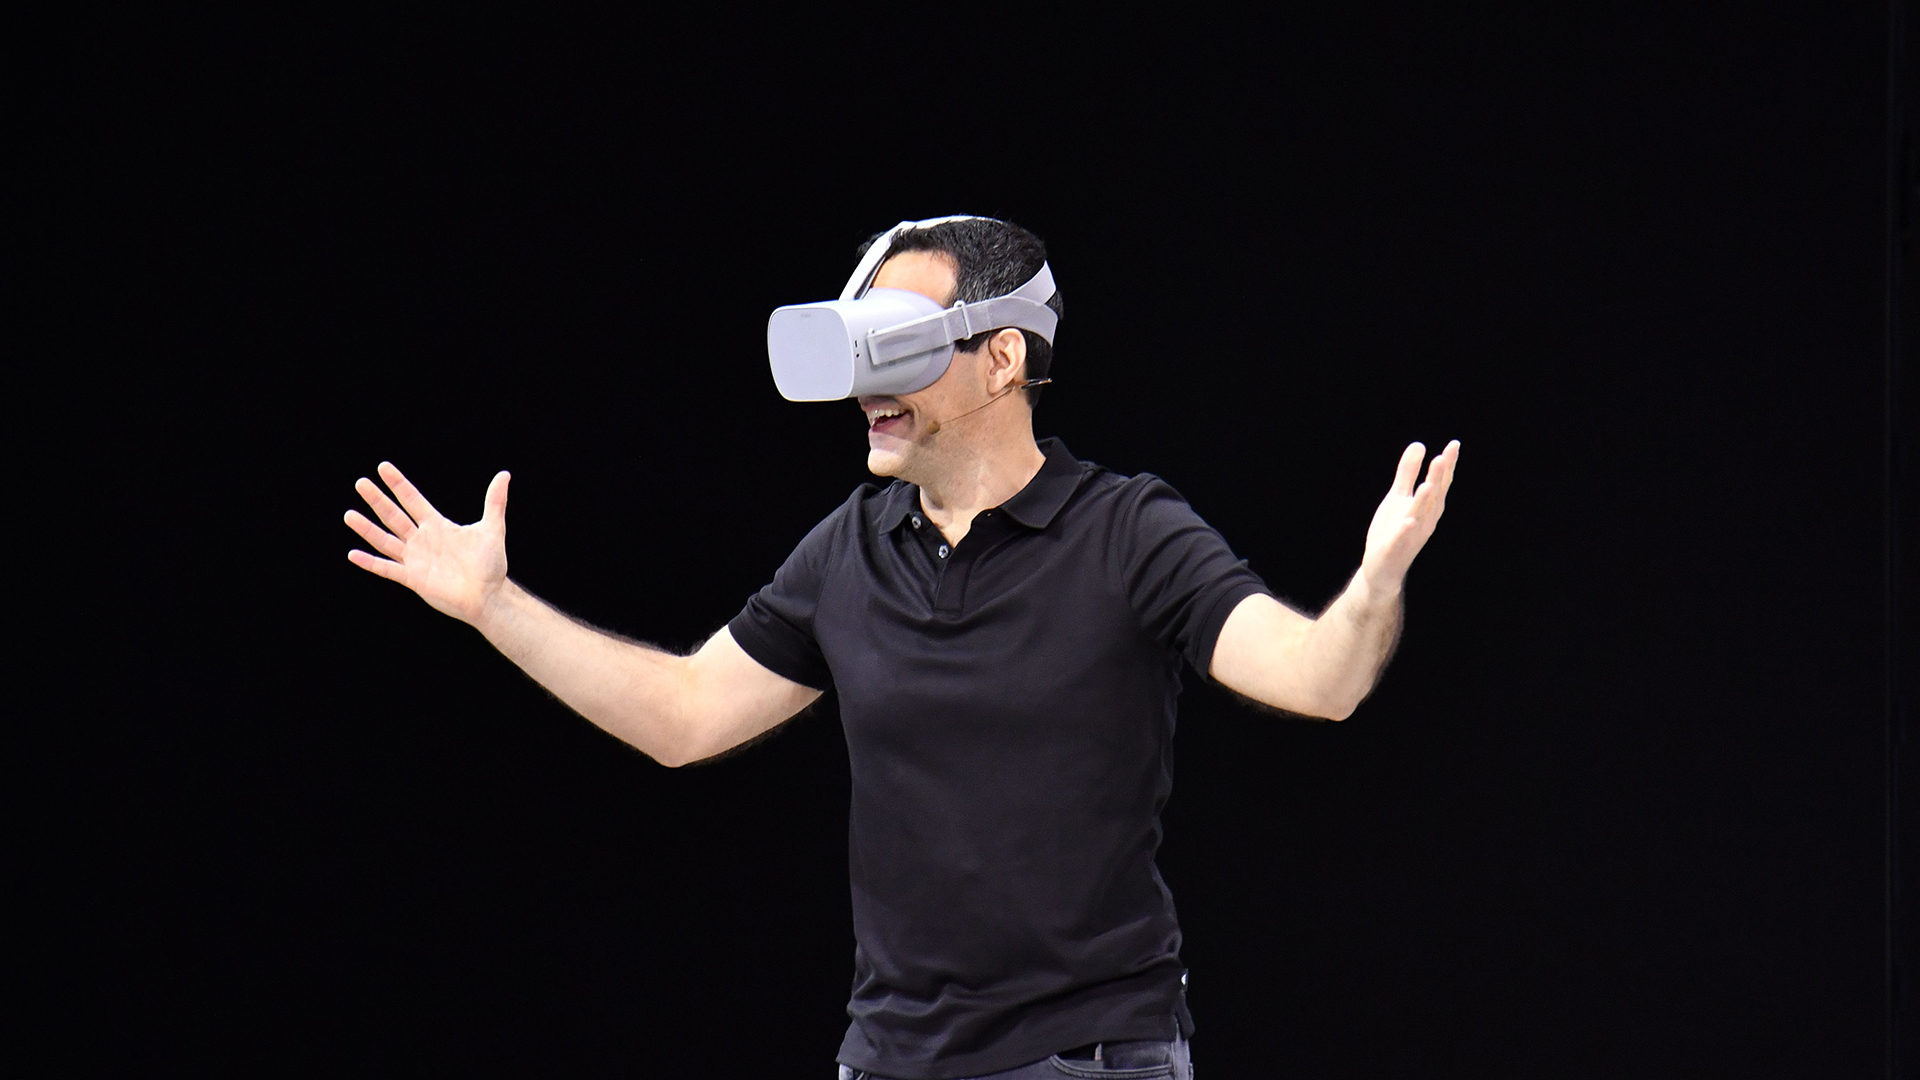 Facebook vice president of VR Hugo Barra demonstrates how to use the new Oculus Go during the annual F8 summit at the San Jose McEnery Convention Center in San Jose, California on May 1, 2018.